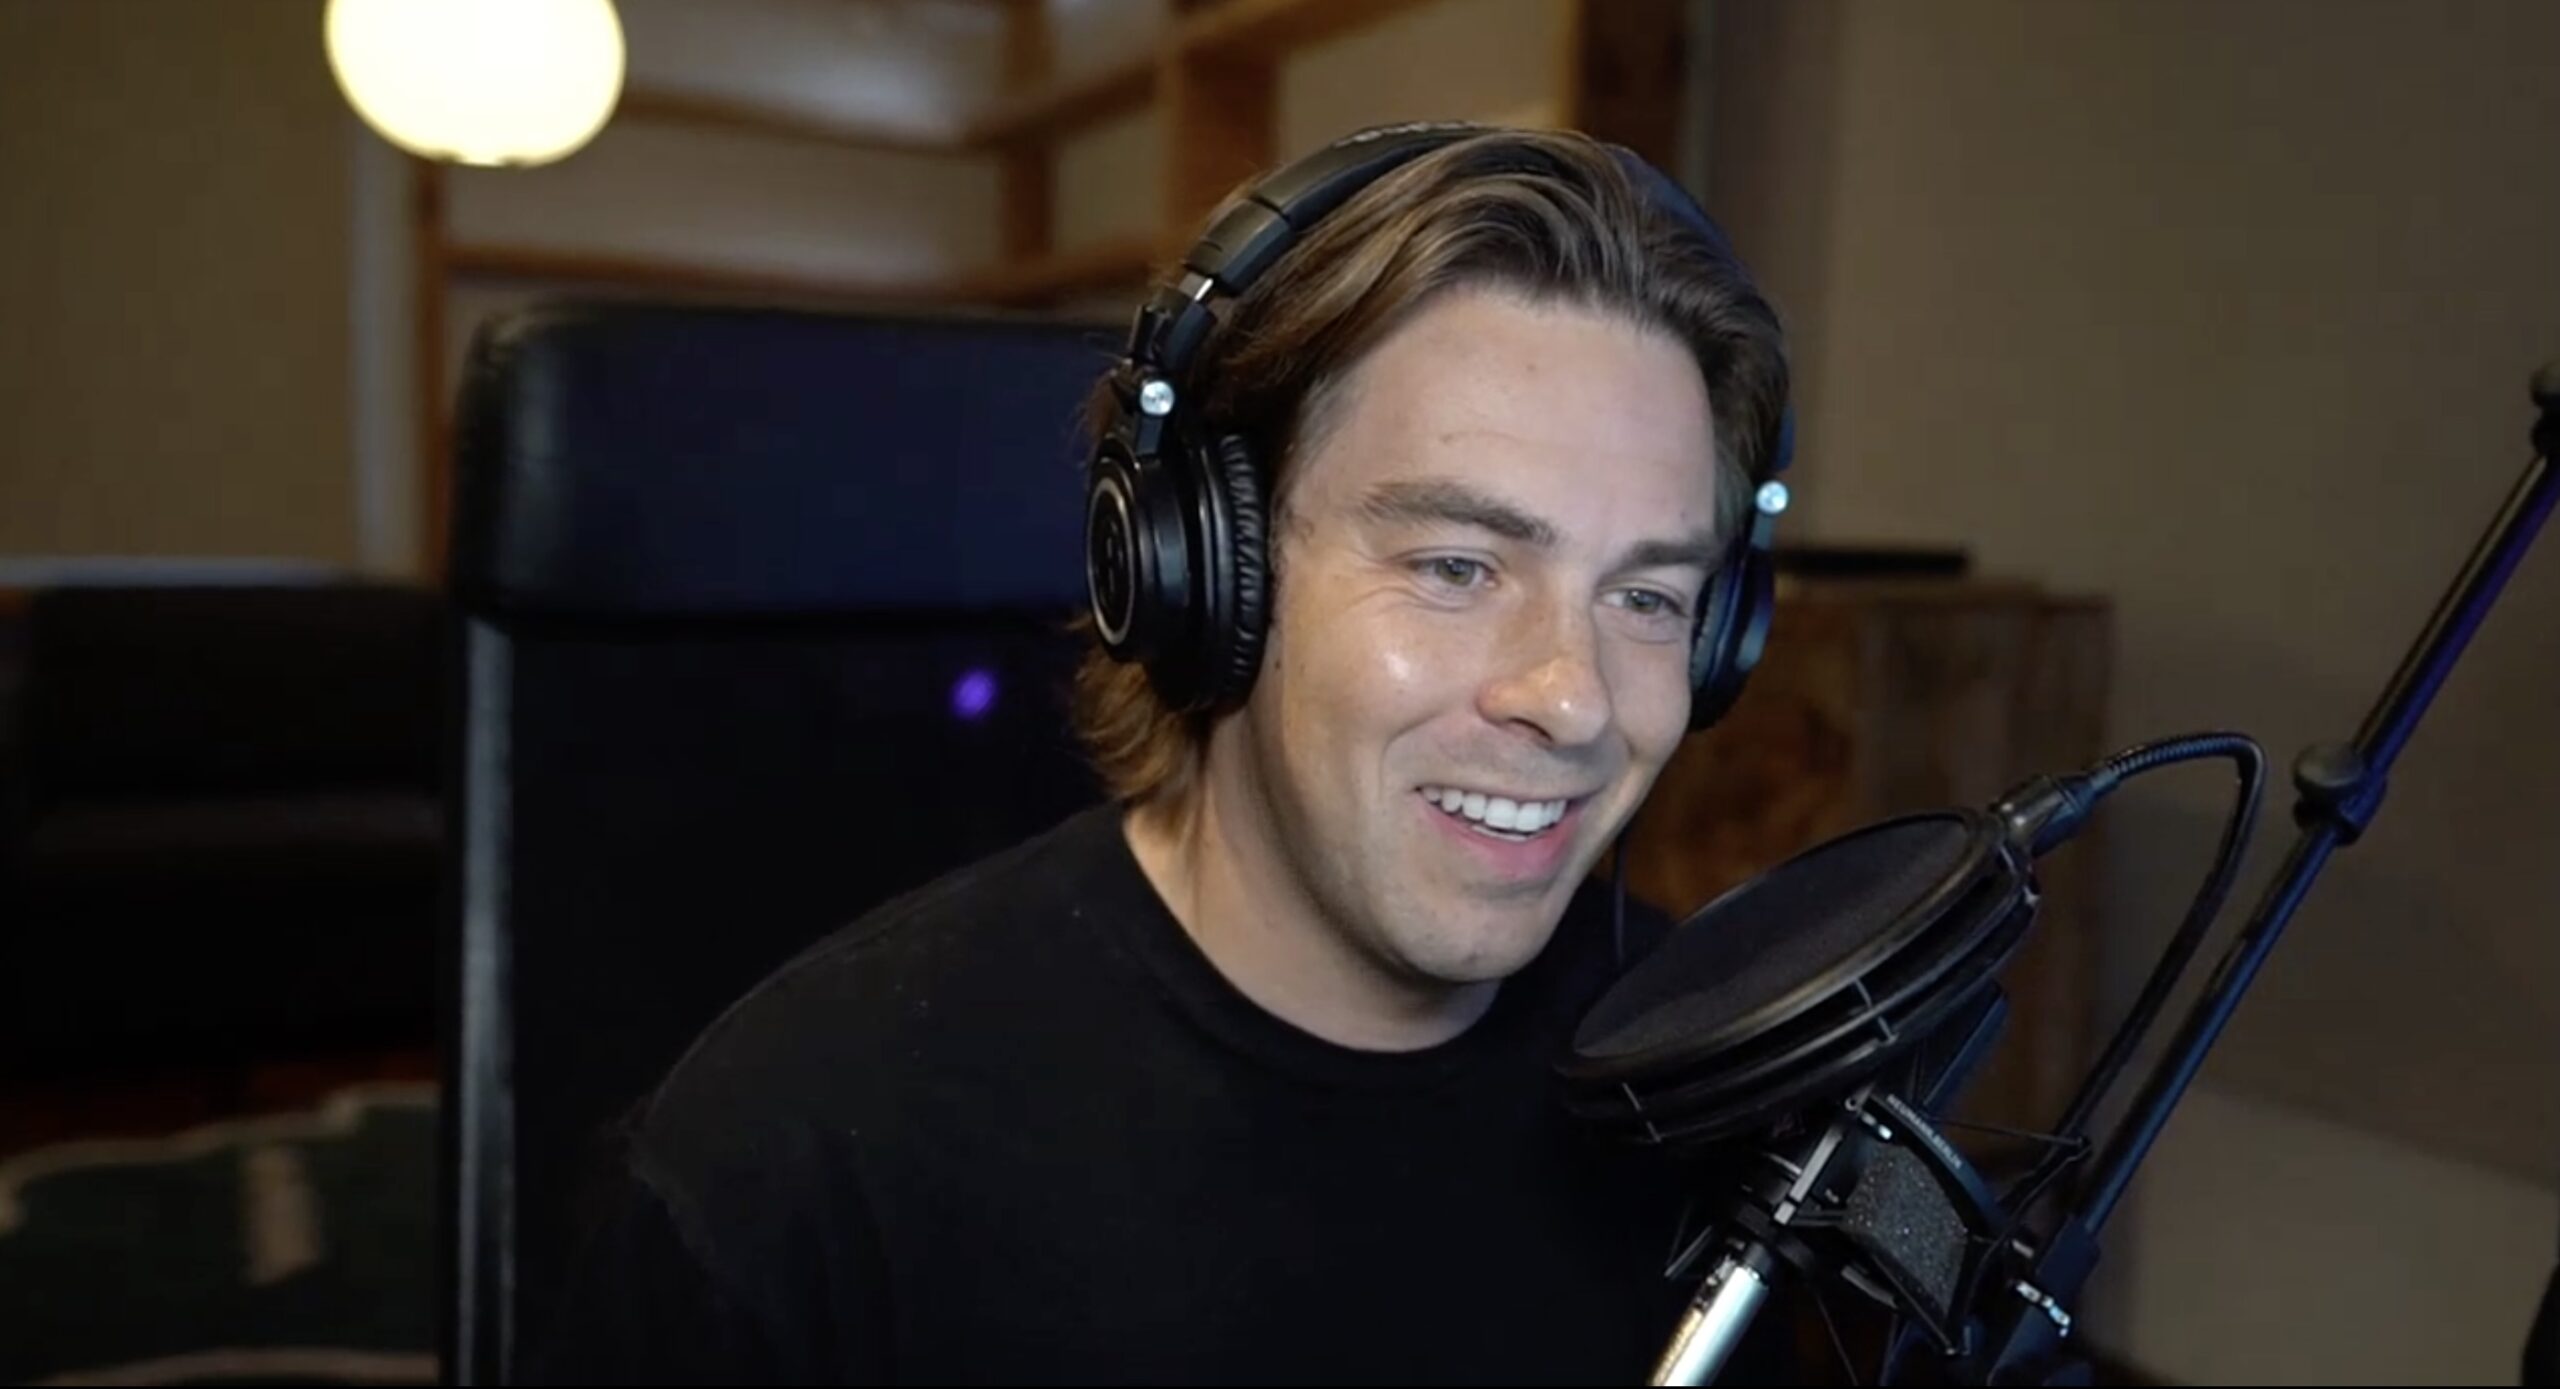 Cody Ko kicks off homecoming week with ‘Q&A’-style comedy show